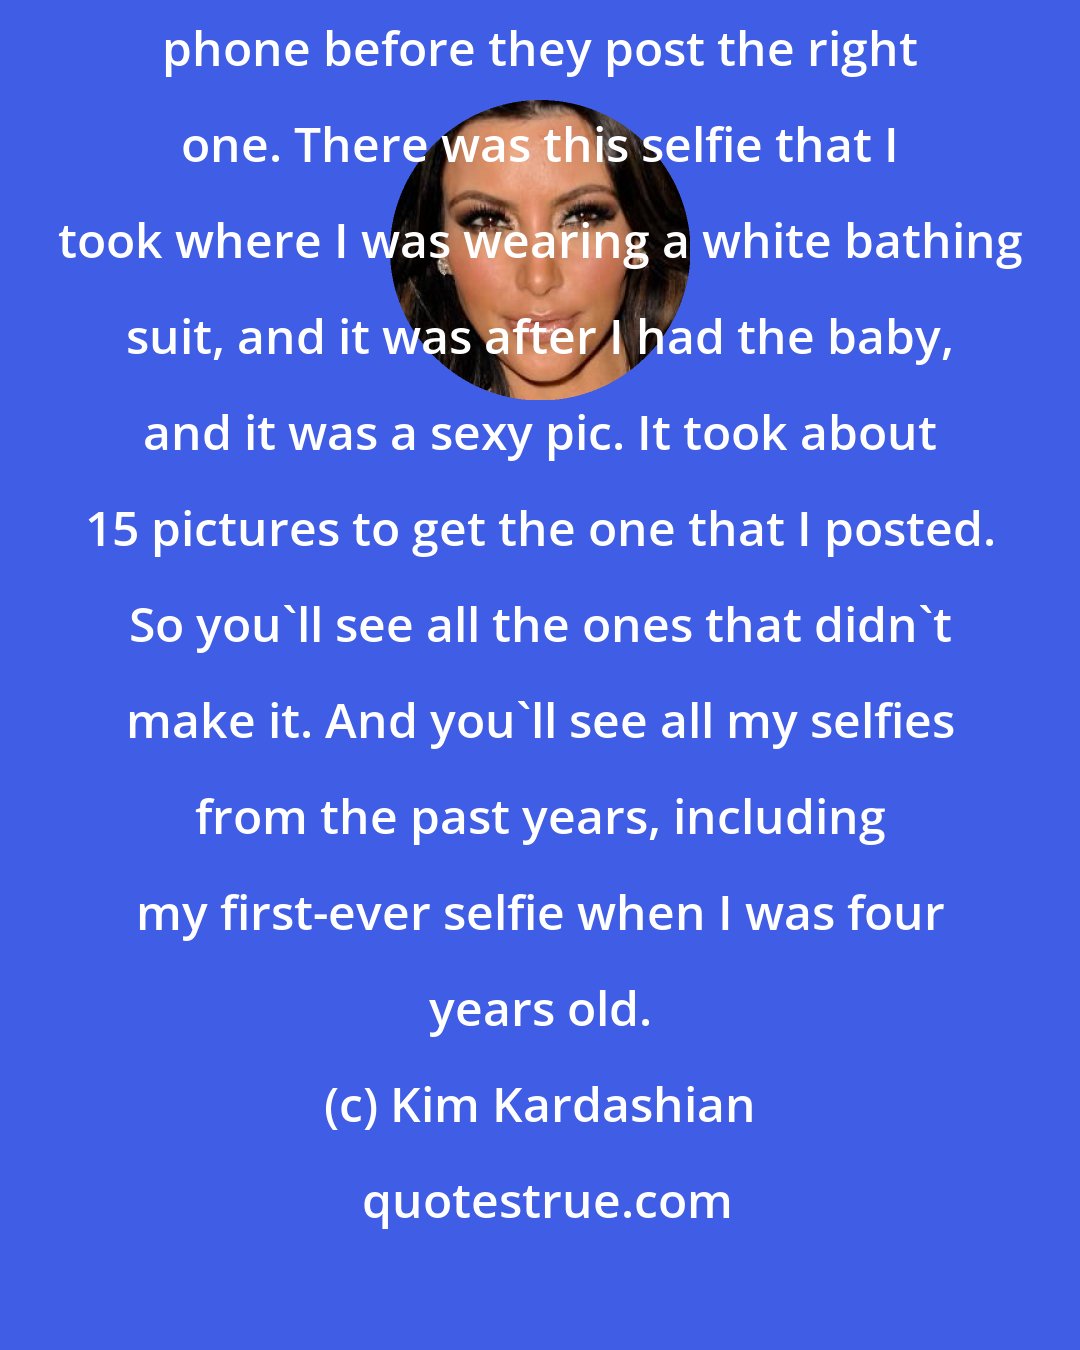 Kim Kardashian: I think it really takes about 15-20 selfies that someone takes on their phone before they post the right one. There was this selfie that I took where I was wearing a white bathing suit, and it was after I had the baby, and it was a sexy pic. It took about 15 pictures to get the one that I posted. So you'll see all the ones that didn't make it. And you'll see all my selfies from the past years, including my first-ever selfie when I was four years old.